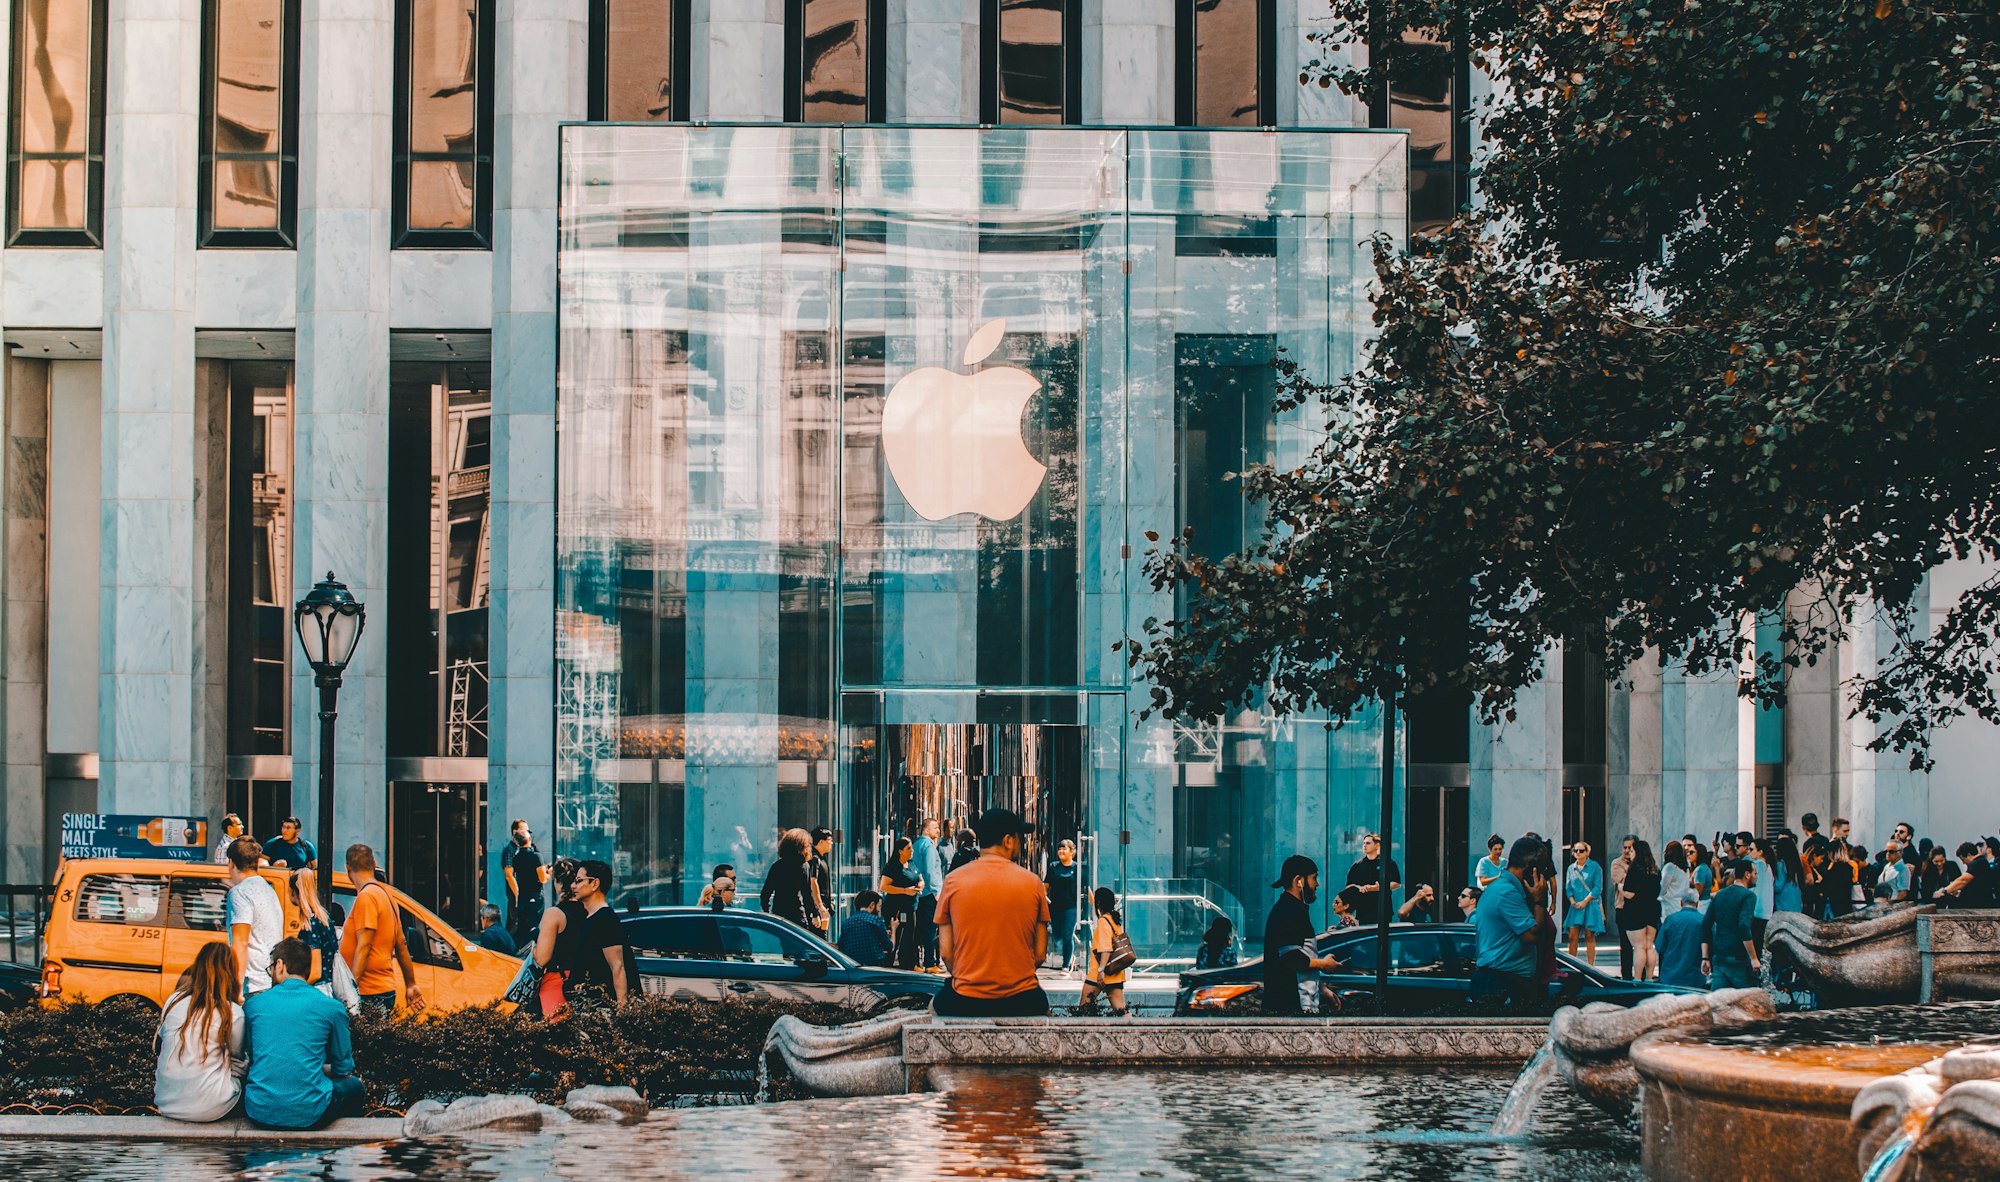 A man sitting outside of the majestic architecture masterpiece that is the Apple Store at Fifth Avenue in New York City. Just days after the iPhone 11 was released.